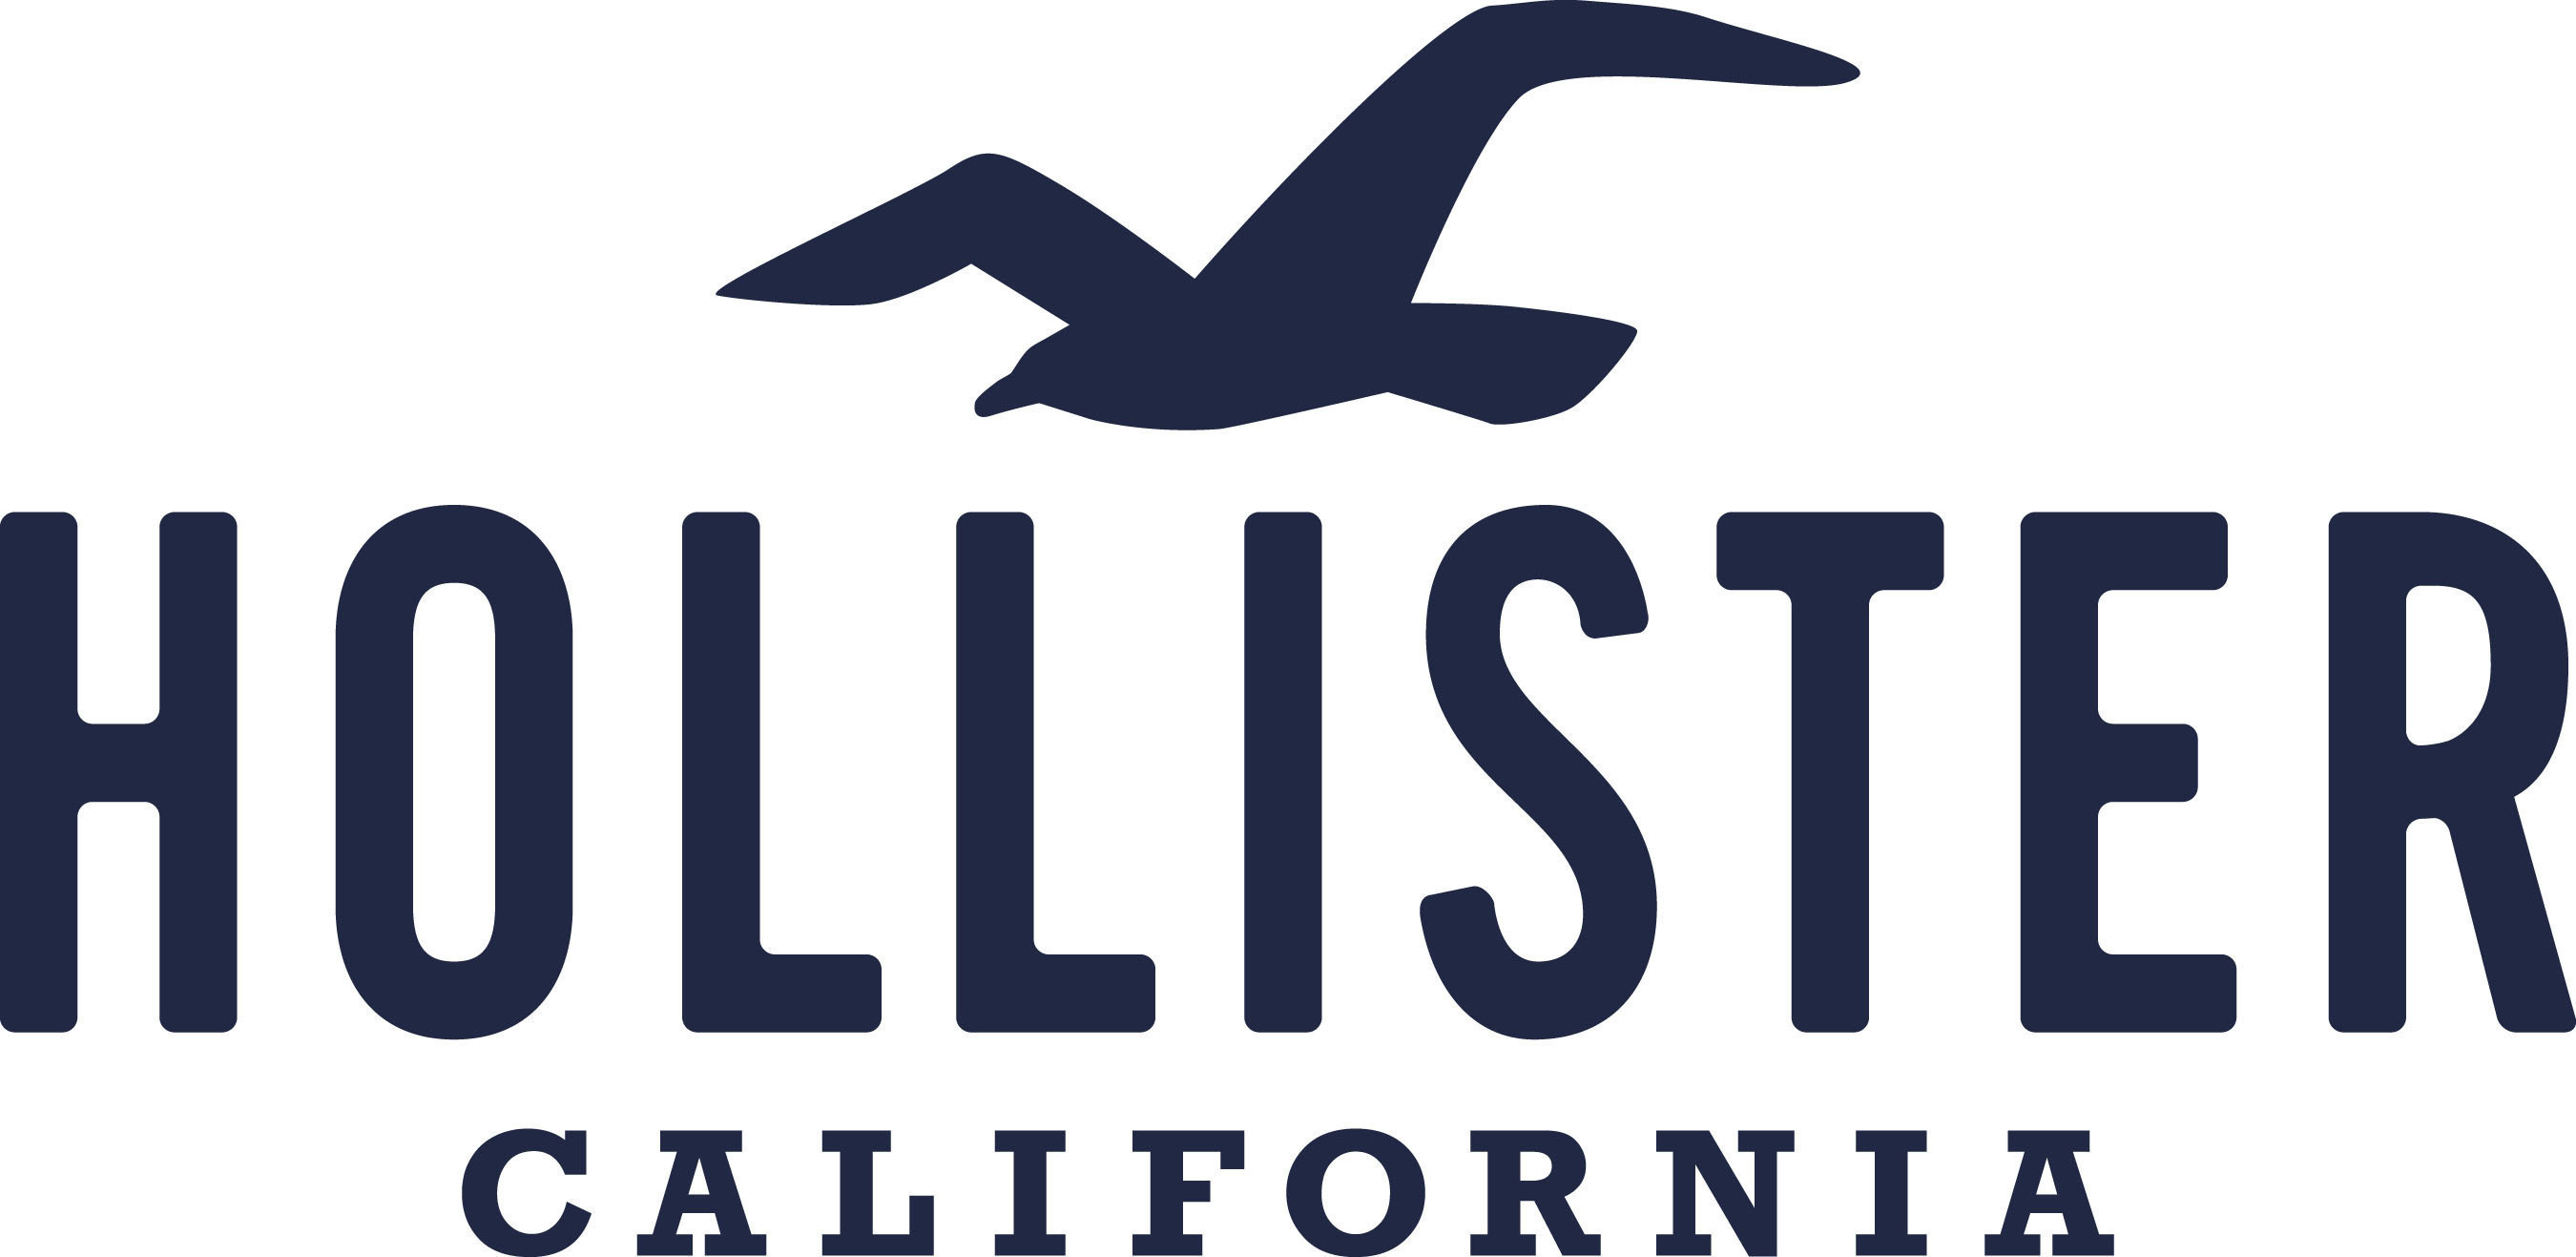 hollister collection